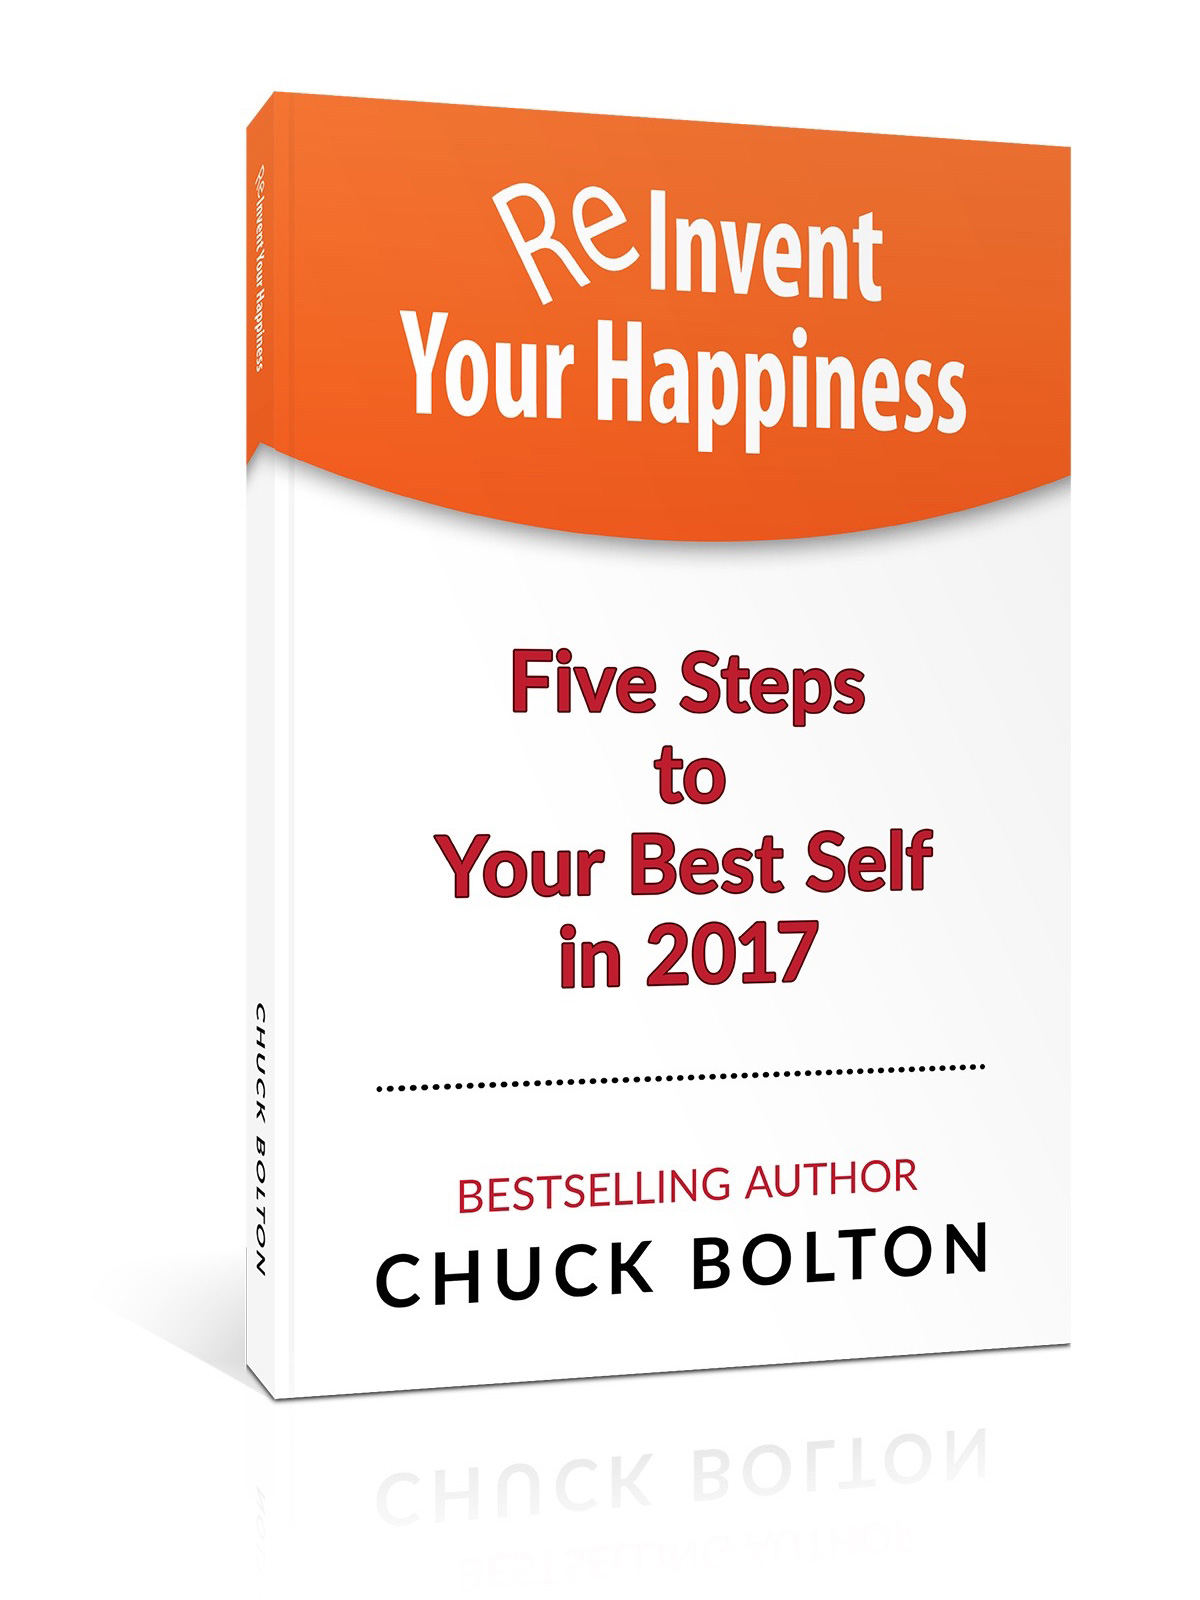 Reinvent Your Happiness - Bestselling Book by Executive Coach Chuck Bolton